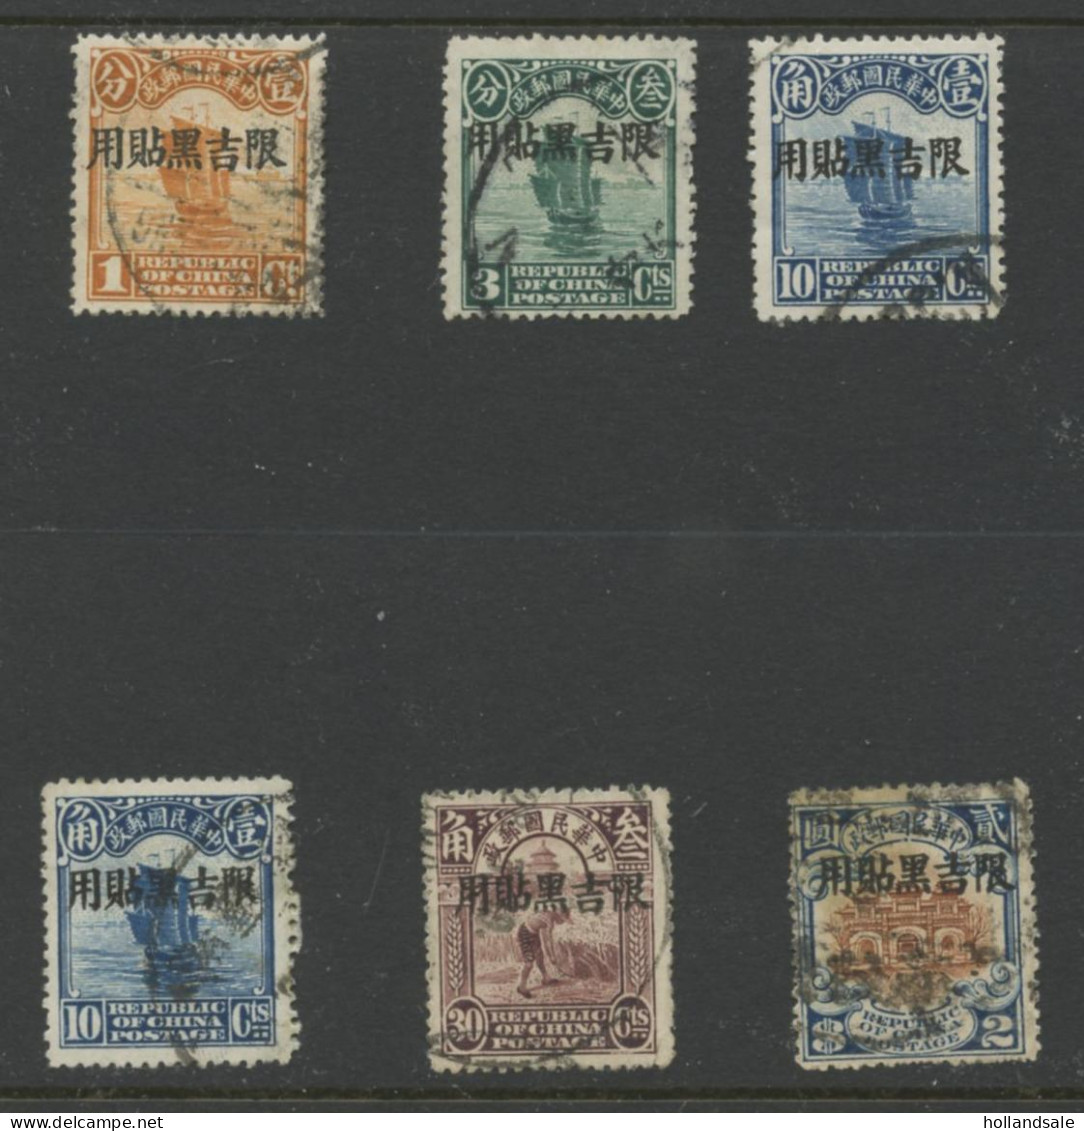 CHINA / Province Manchuria - Six (6) Overprinted Stamps. Used. Including $2. - Manchuria 1927-33